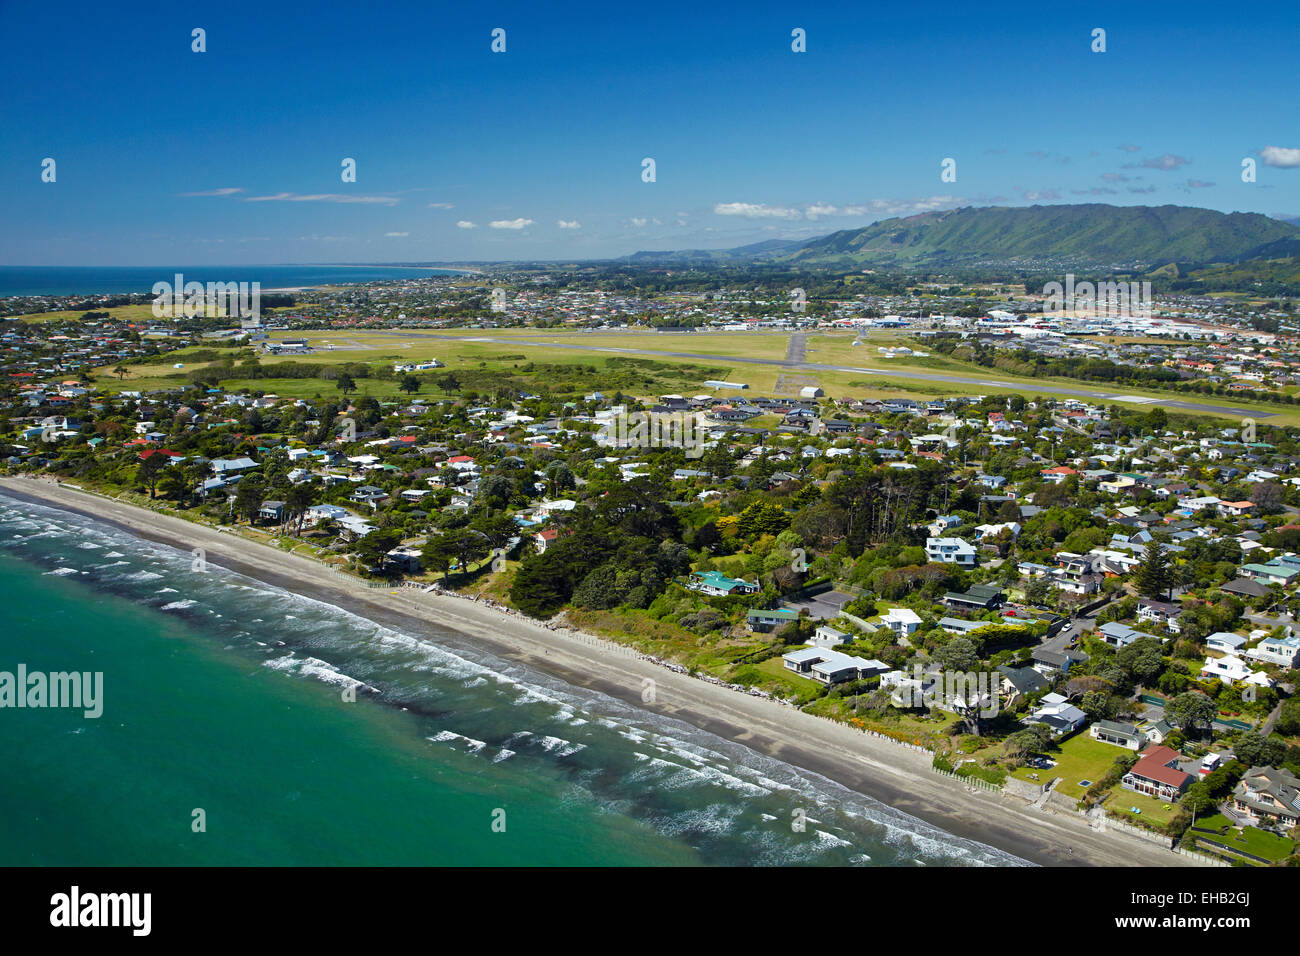 There are 3 ways to get from Palmerston North to Paraparaumu by train, bus or car